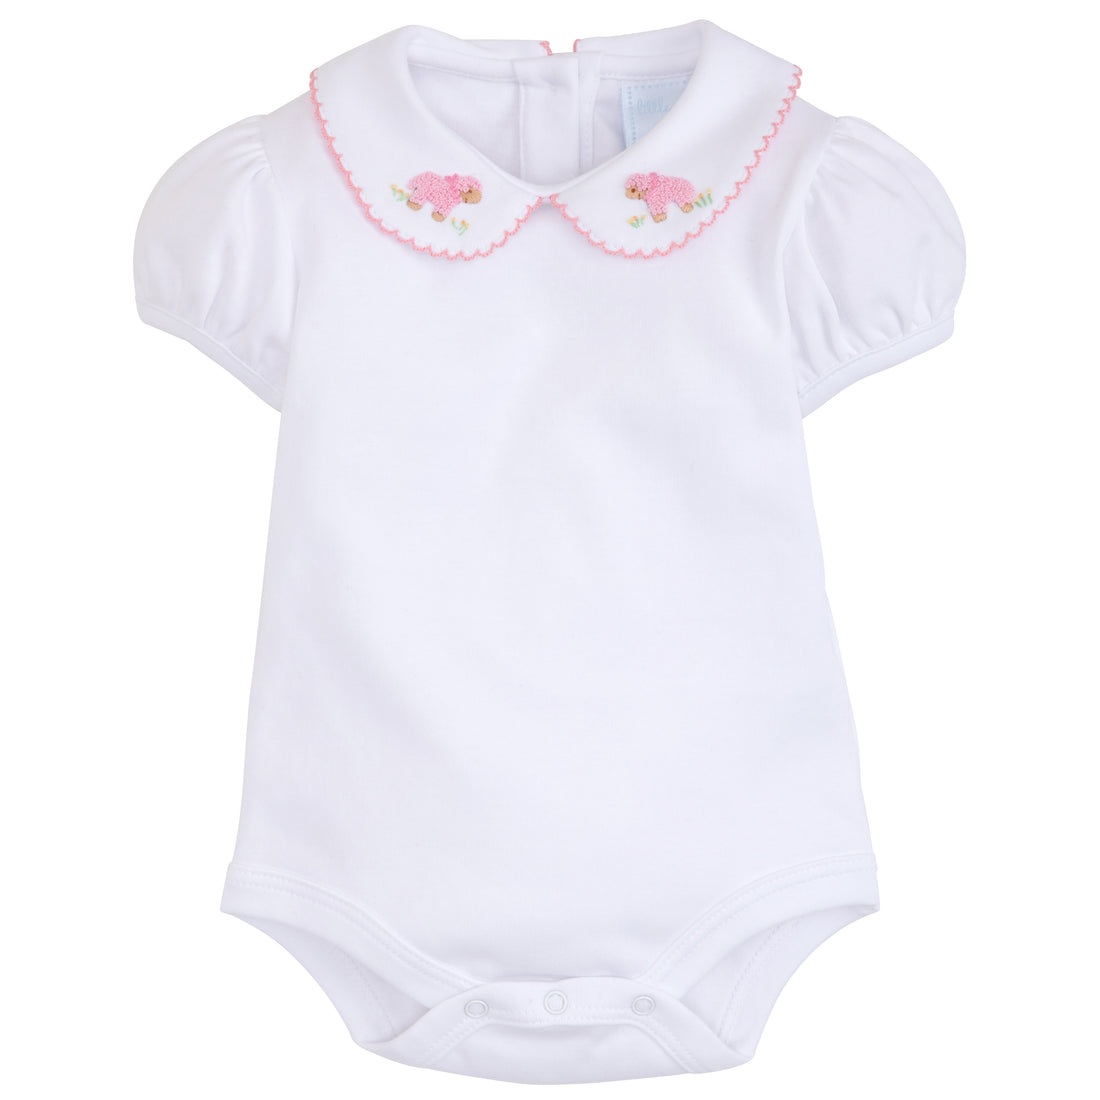 Little English pinpoint onesie for baby girl with sheep design on collar